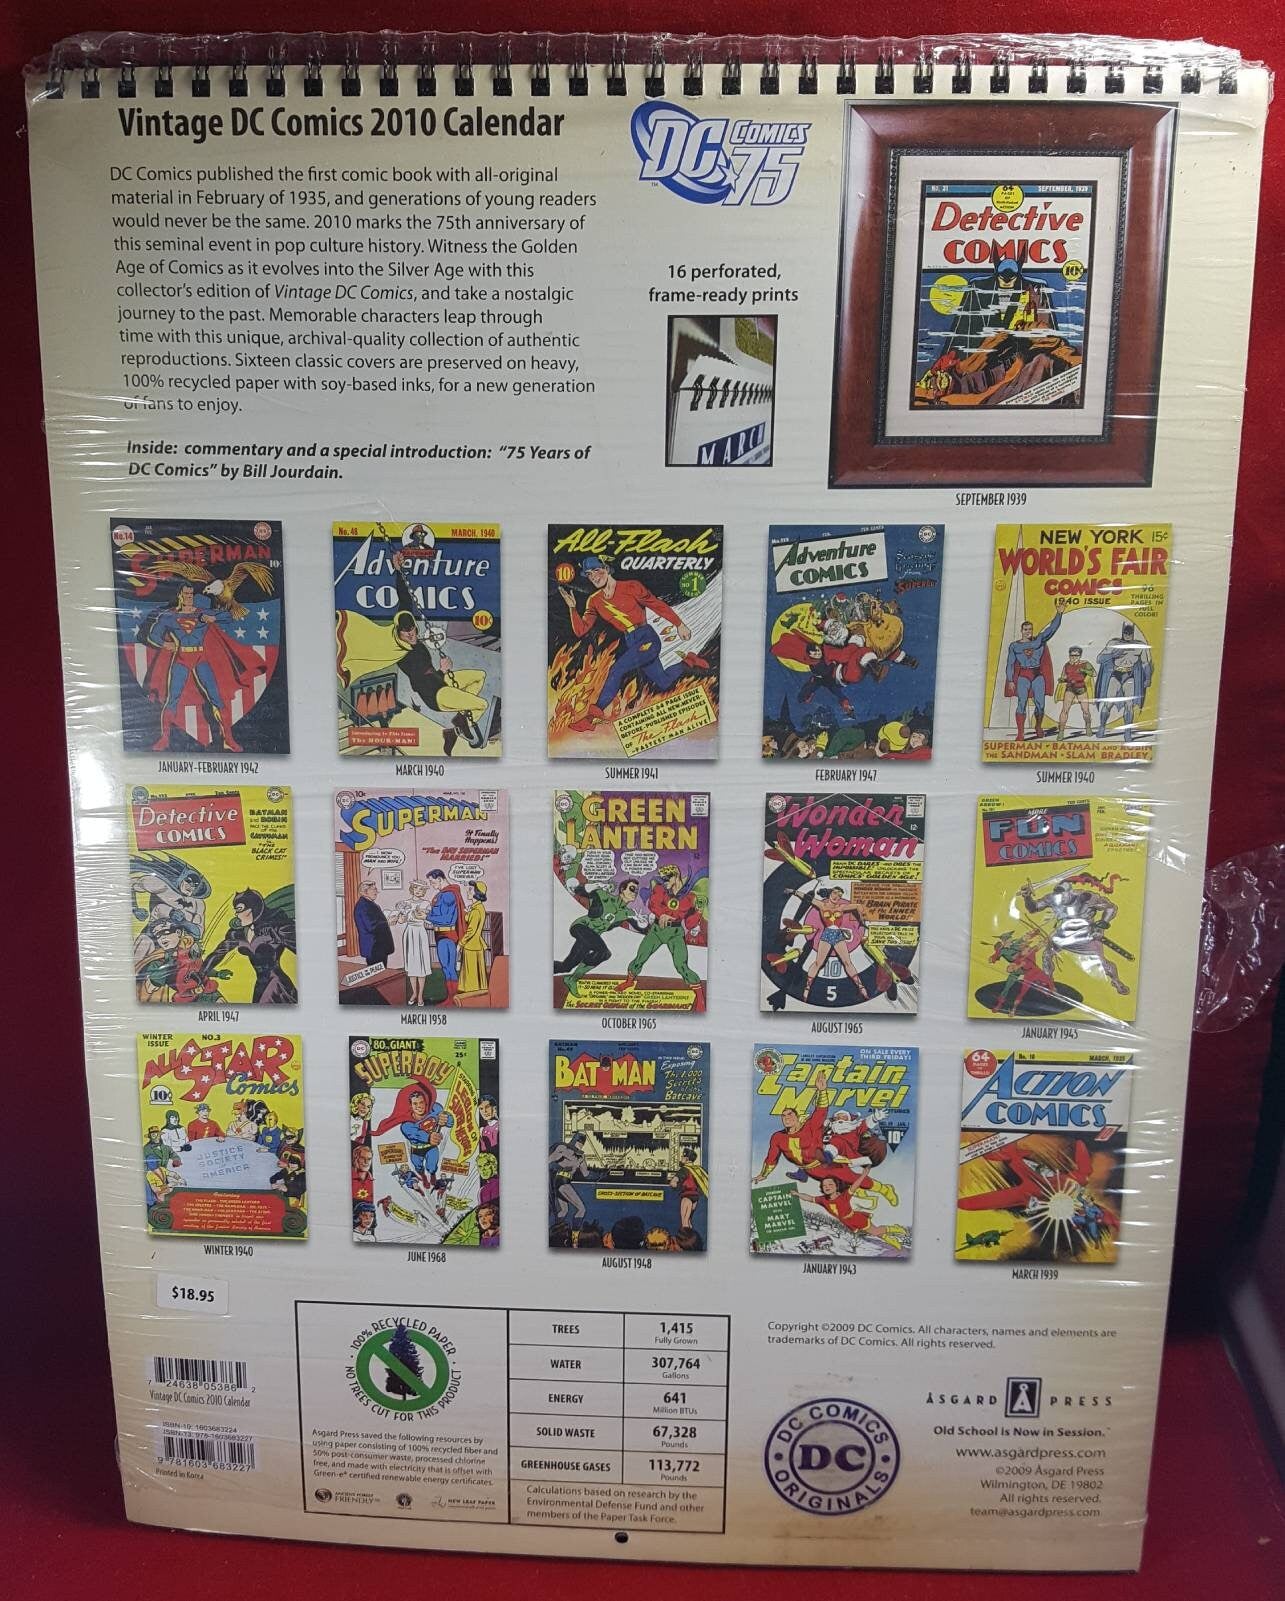 Classic covers calender from 2008 that are reproduced for framing (nib)